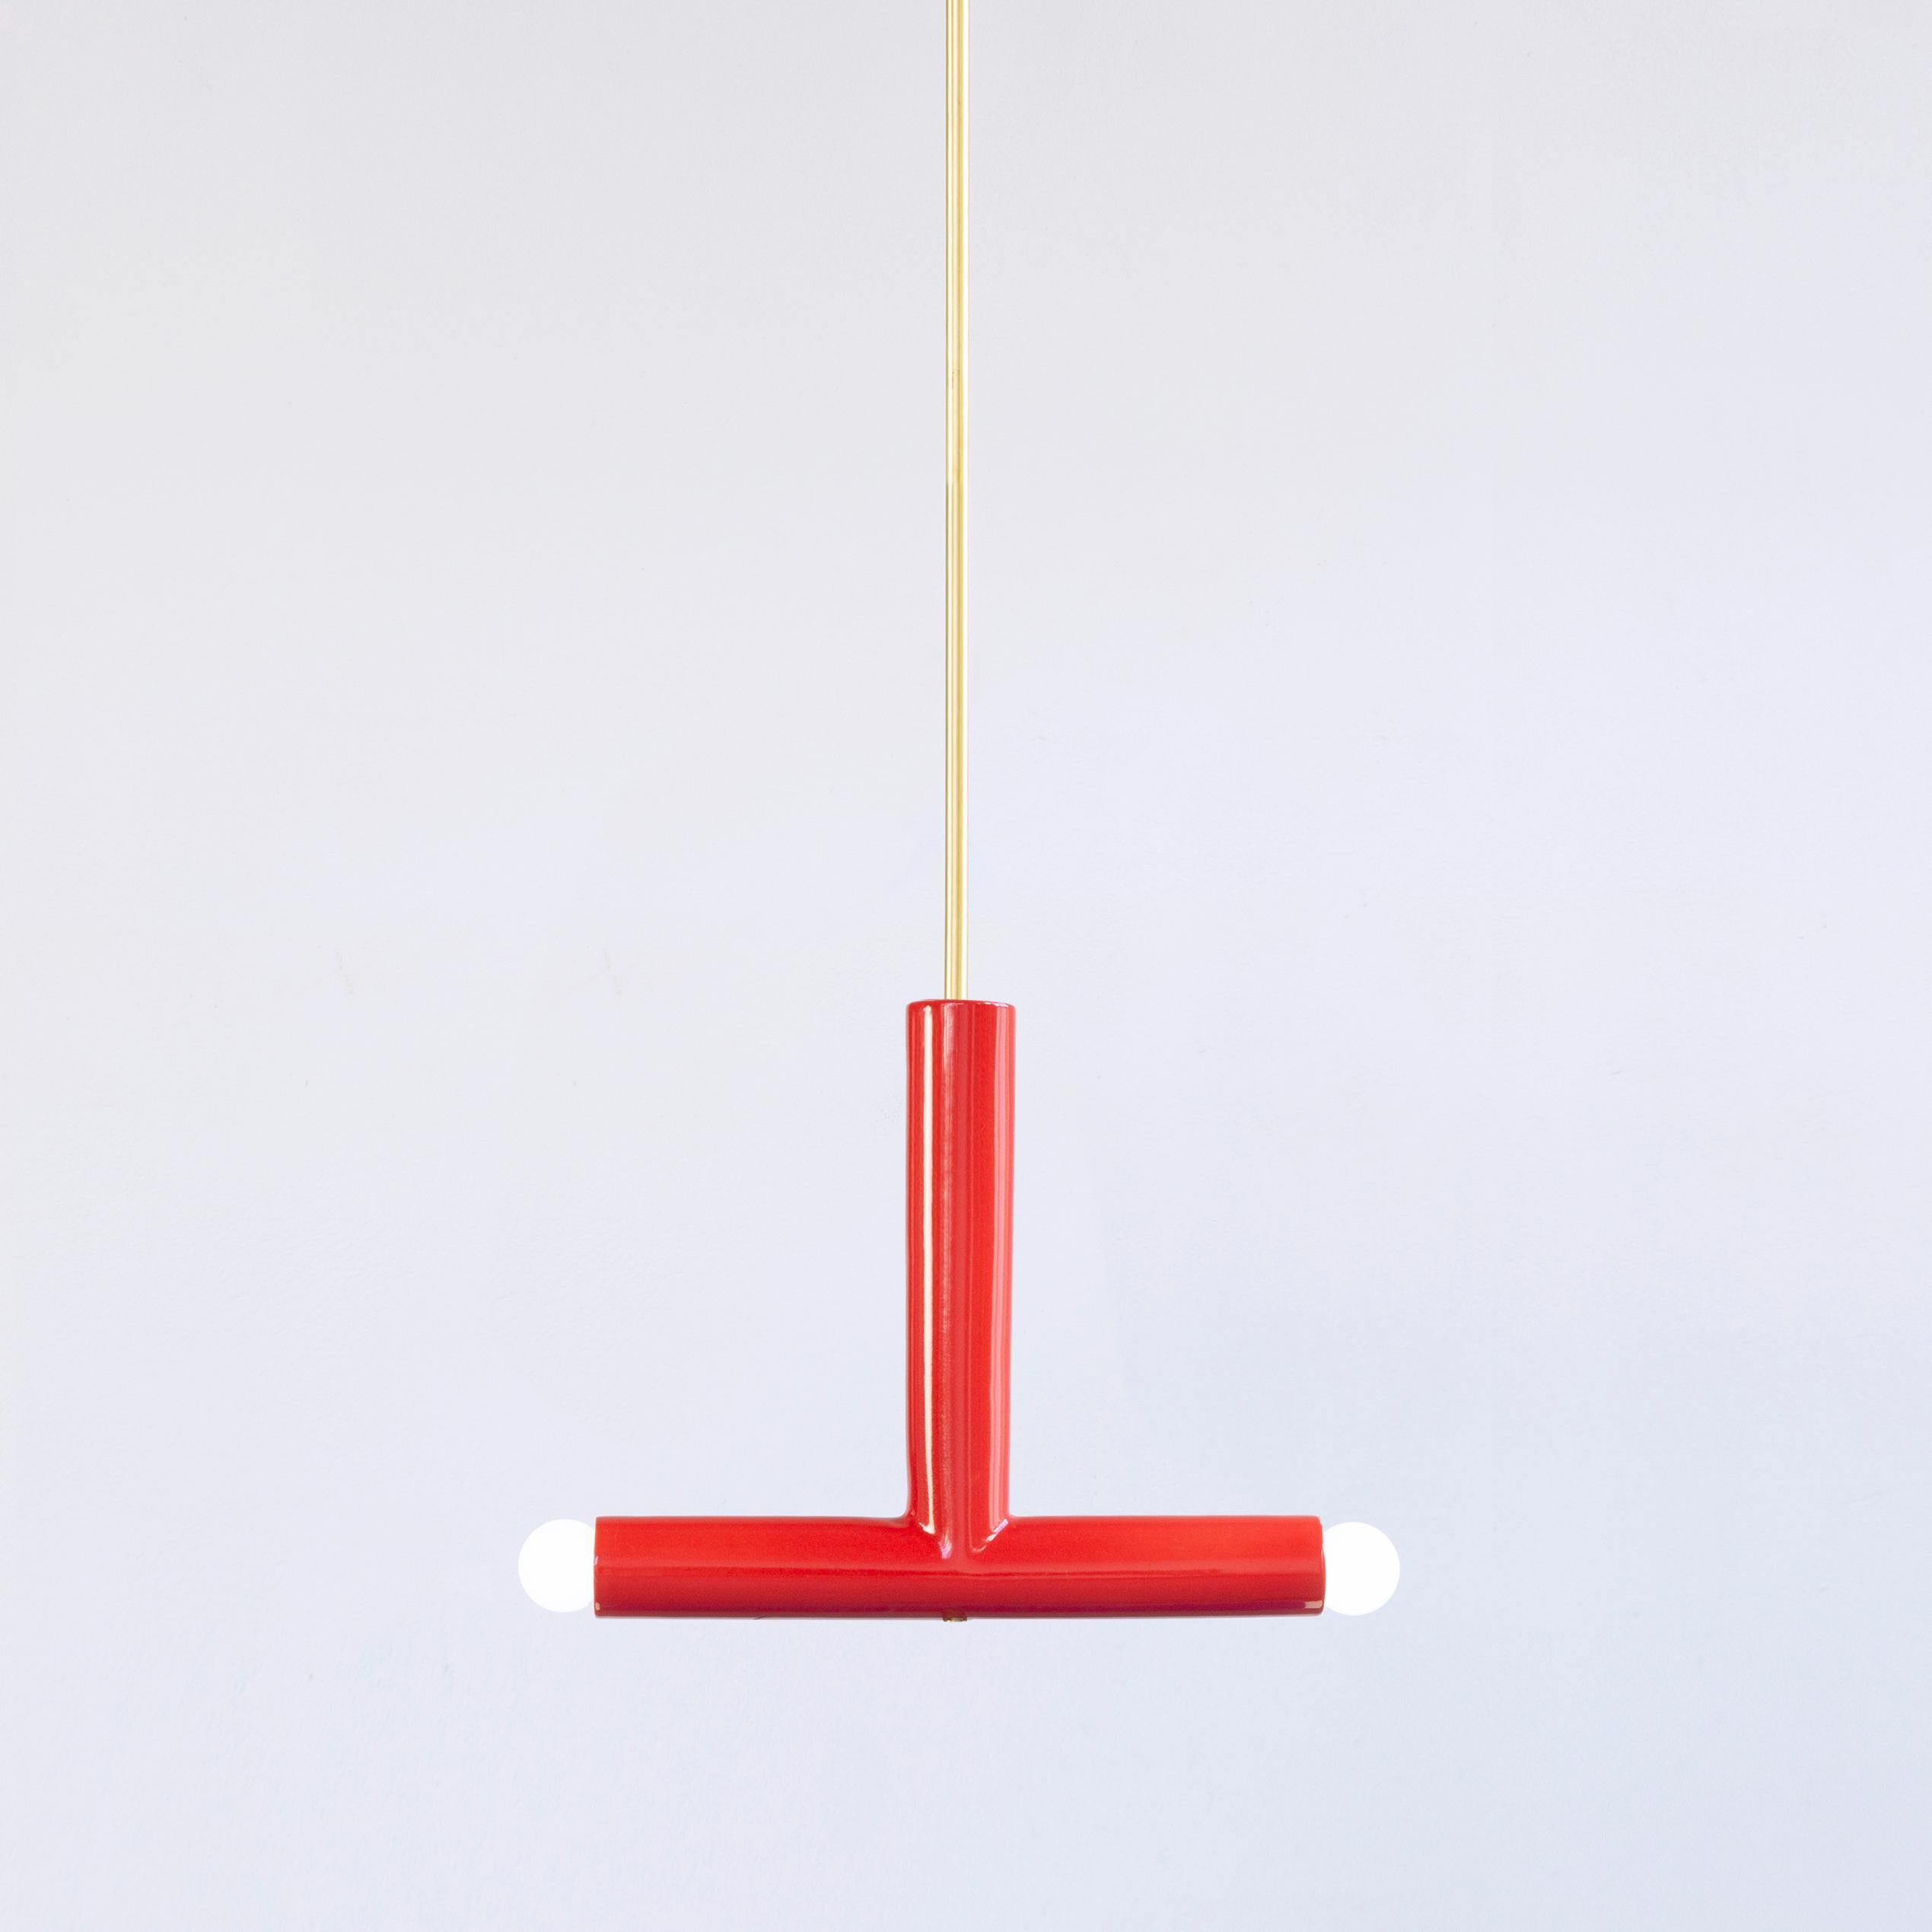 Red TRN B2 pendant lamp by Pani Jurek
Dimensions: D 5 x W 35 x H 30 cm 
Material: Hand glazed ceramic and brass.
Available in other colors.
Lamps from the TRN collection hang on a metal tube, not on a cable. This allows the lamp to be mounted in a